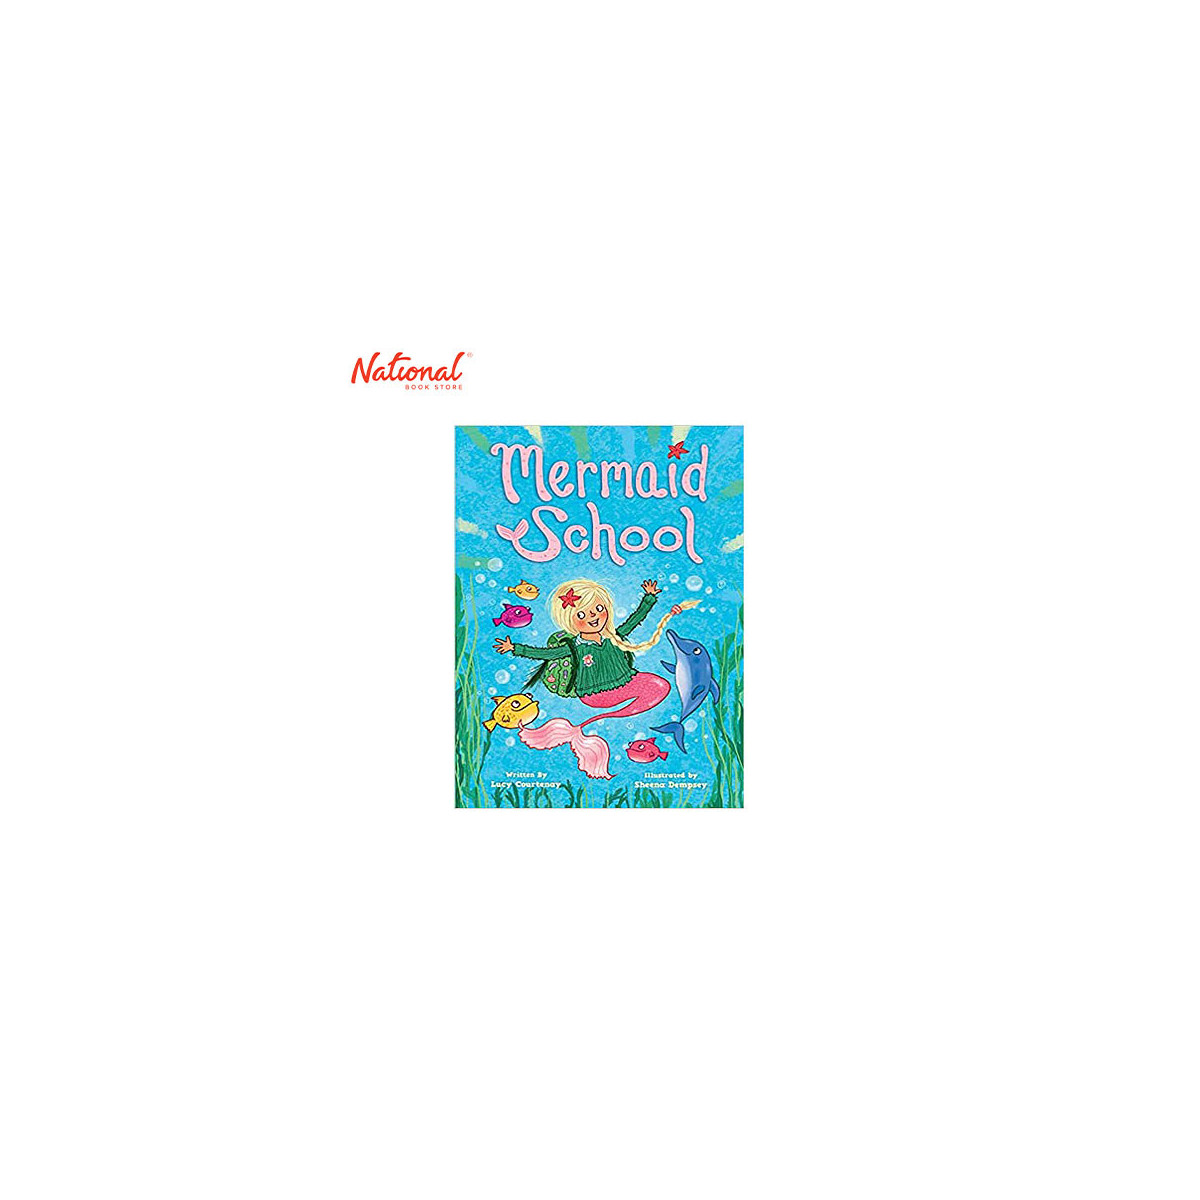 Mermaid School Trade Paperback by Lucy Courtenay